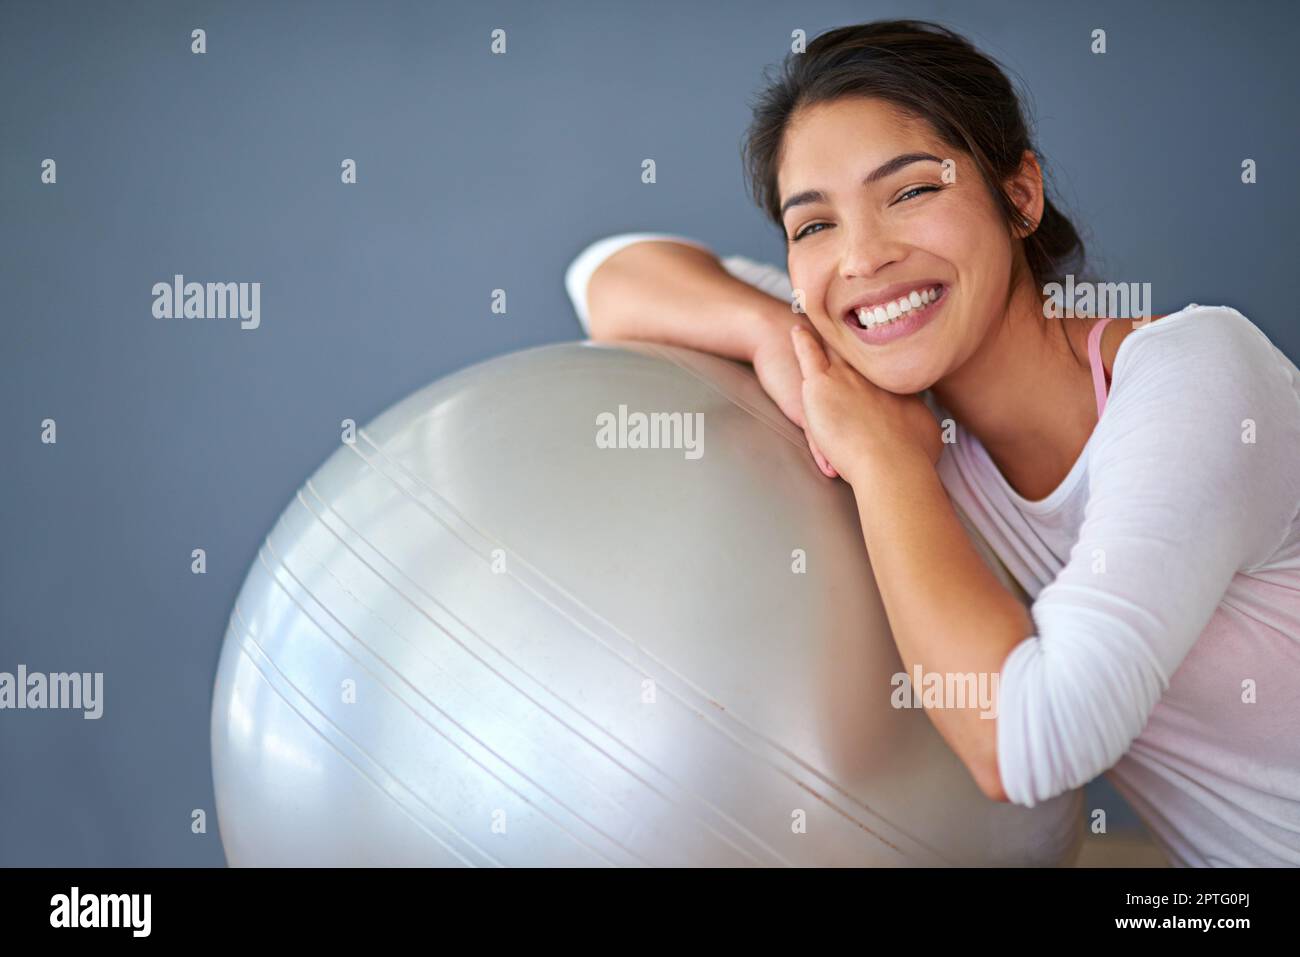 https://c8.alamy.com/comp/2PTG0PJ/this-is-a-must-have-for-every-home-gym-a-sporty-young-woman-leaning-on-a-pilates-ball-against-a-grey-background-2PTG0PJ.jpg